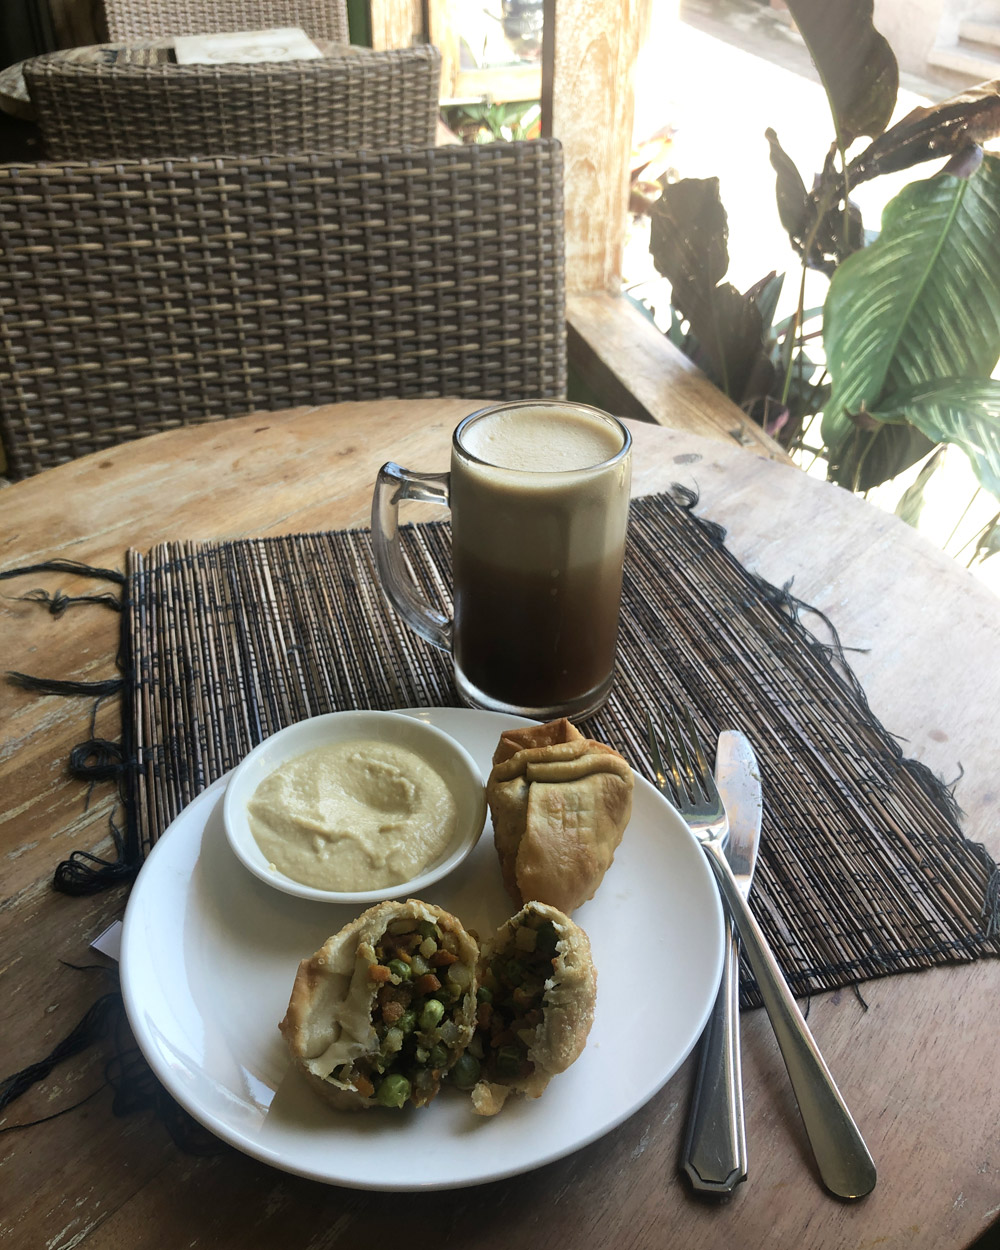 Samosas and ginger beer at Earth Cafe & Grocery in Ubud, Bali